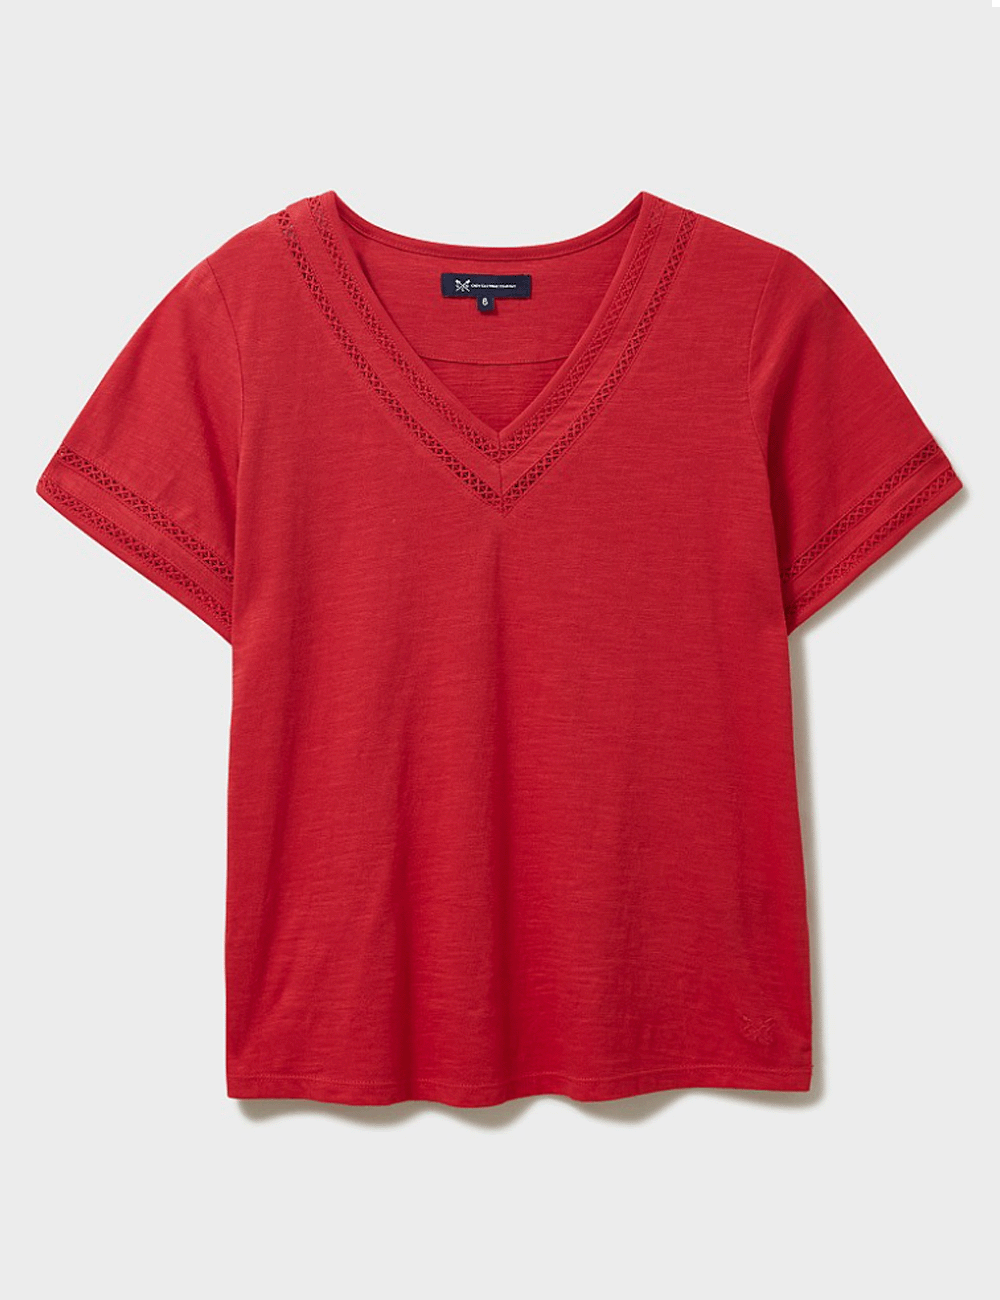 Crew Clothing's Lavendar T-Shirt in Cherry on a grey background